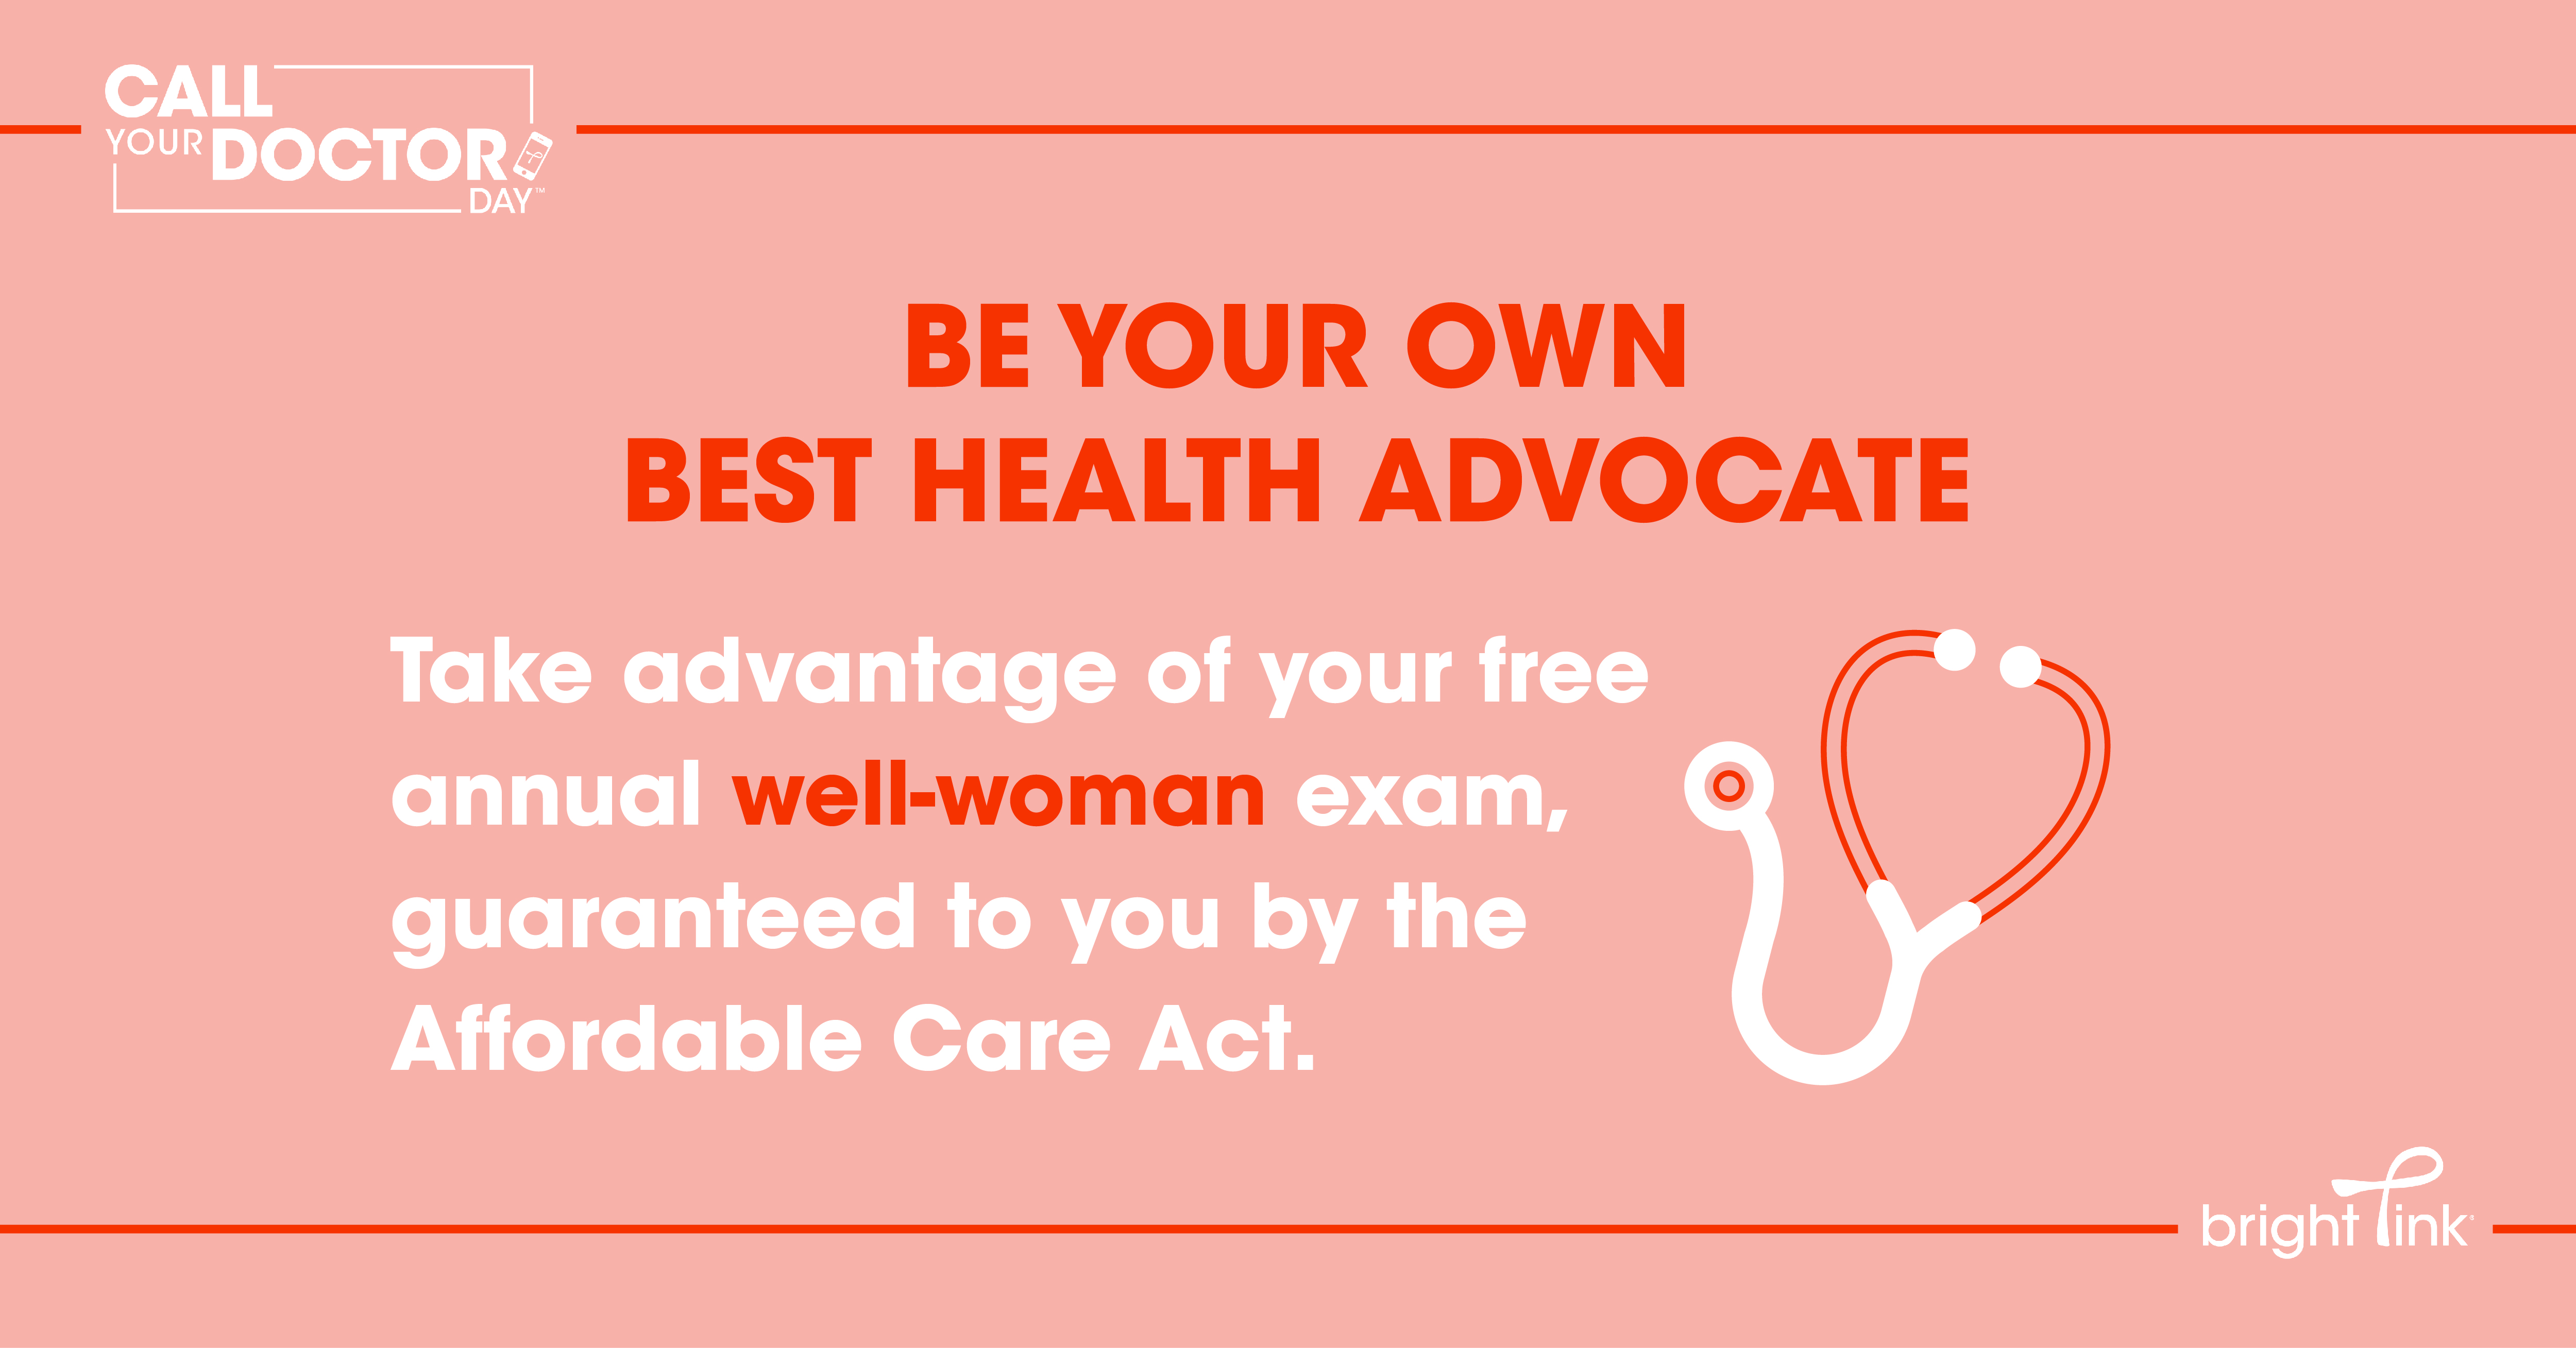 Bright Pink wants you to be your own best health advocate on National Call Your Doctor Day